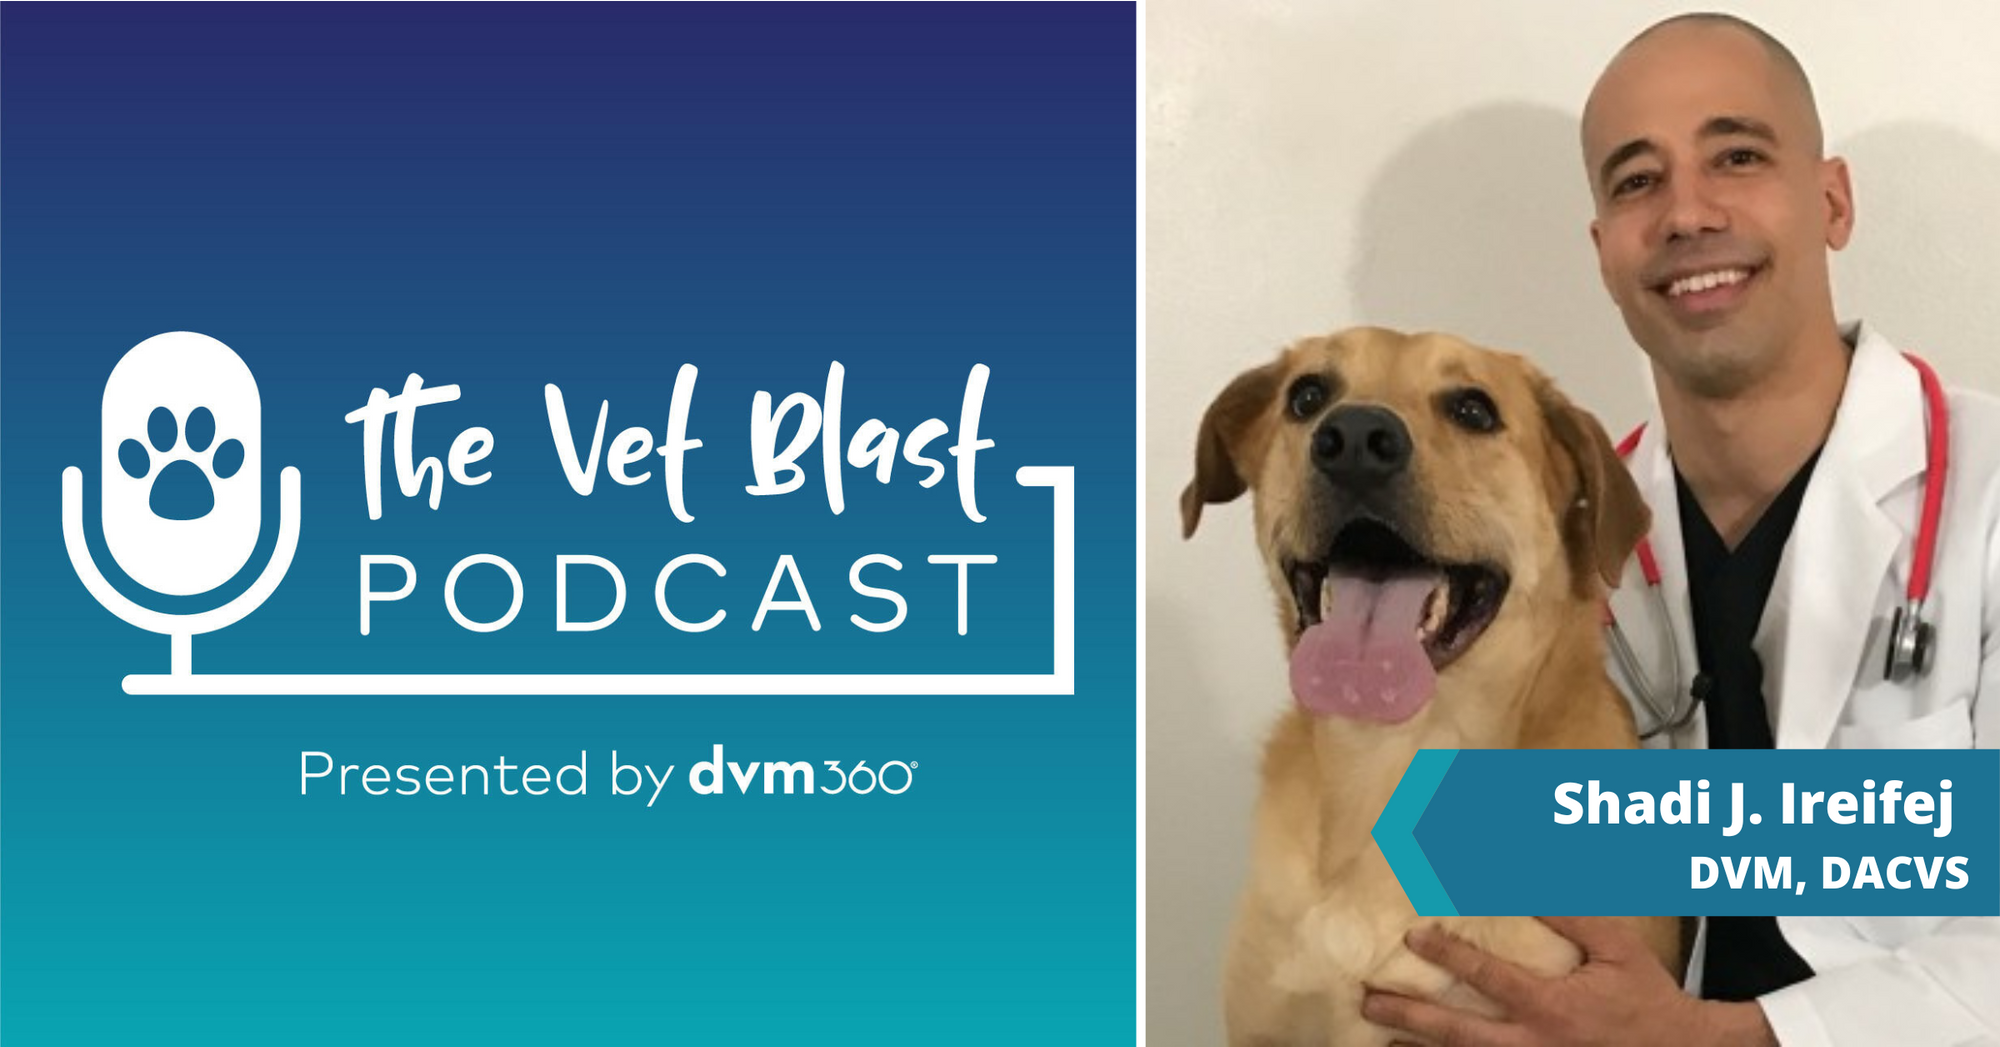 Top dvm360 podcasts of 2022: #1